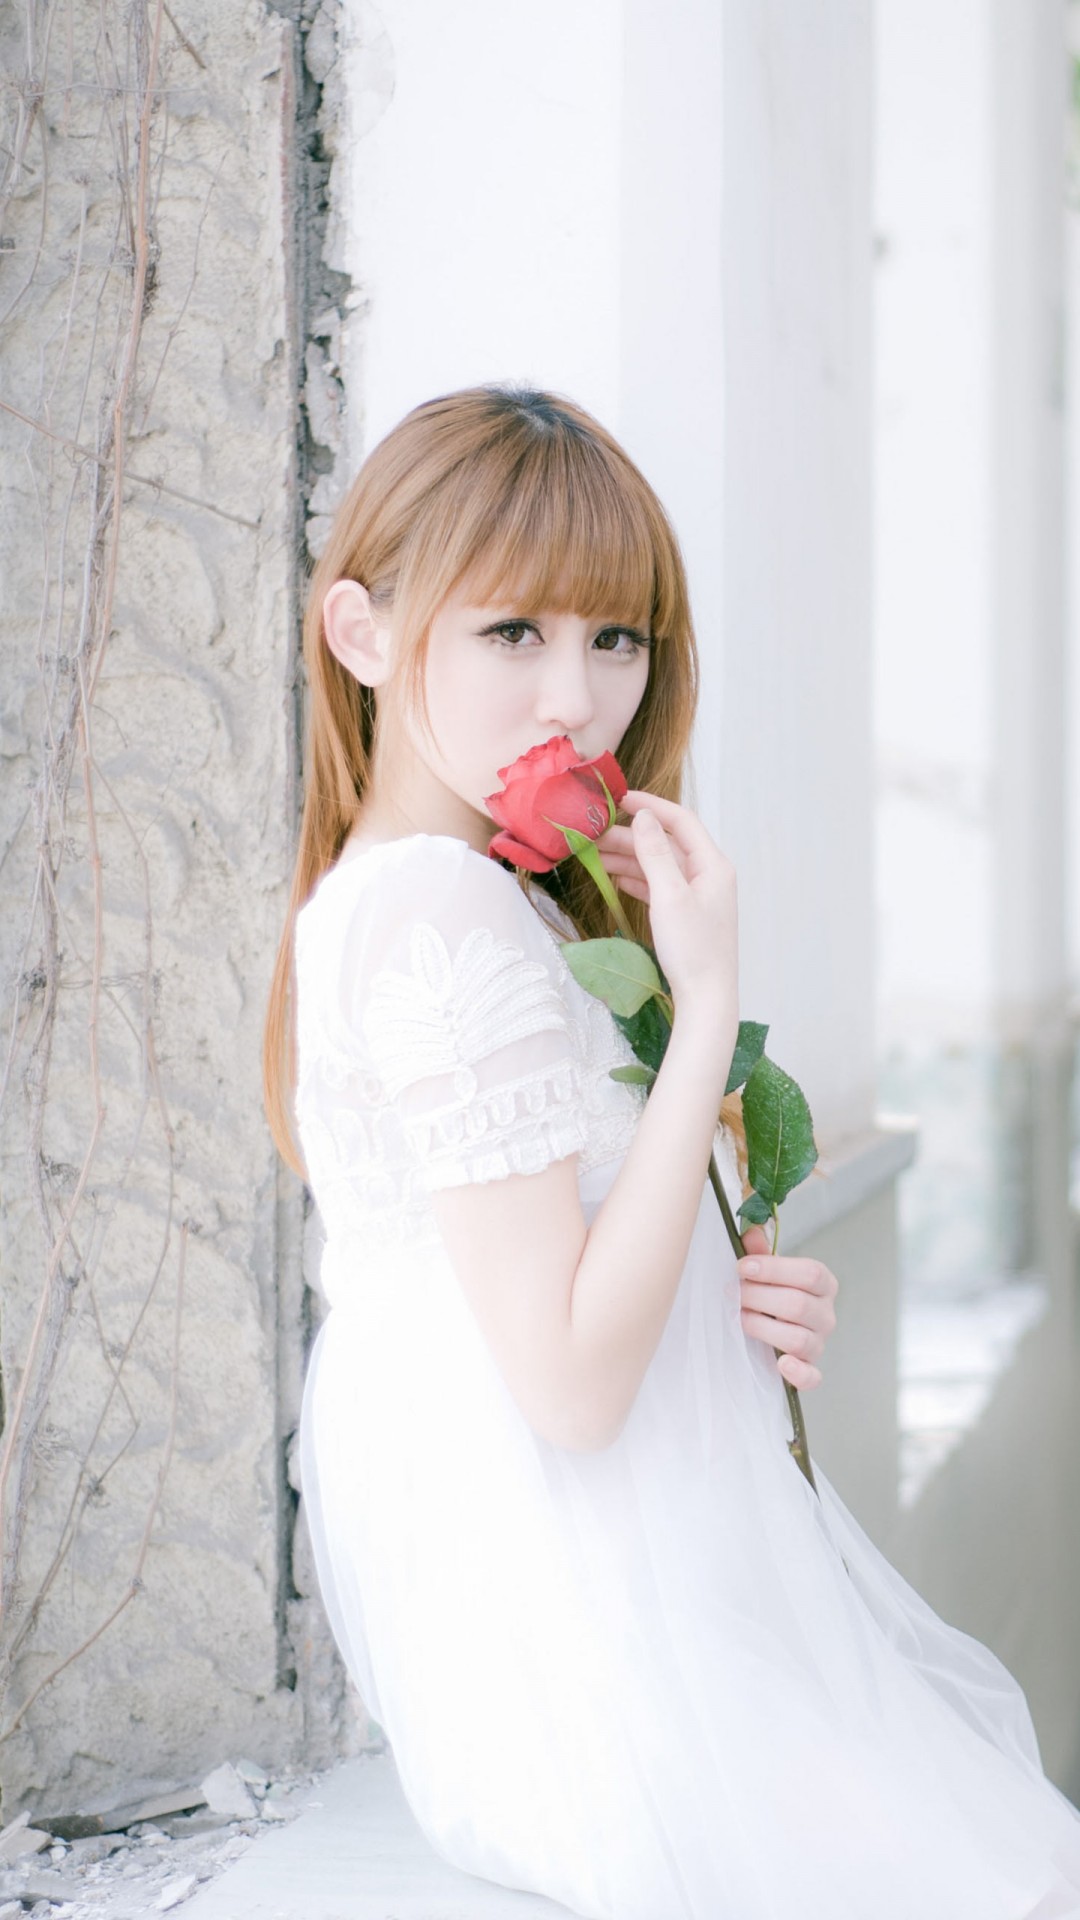 Rose - Girl With Rose In Hand , HD Wallpaper & Backgrounds